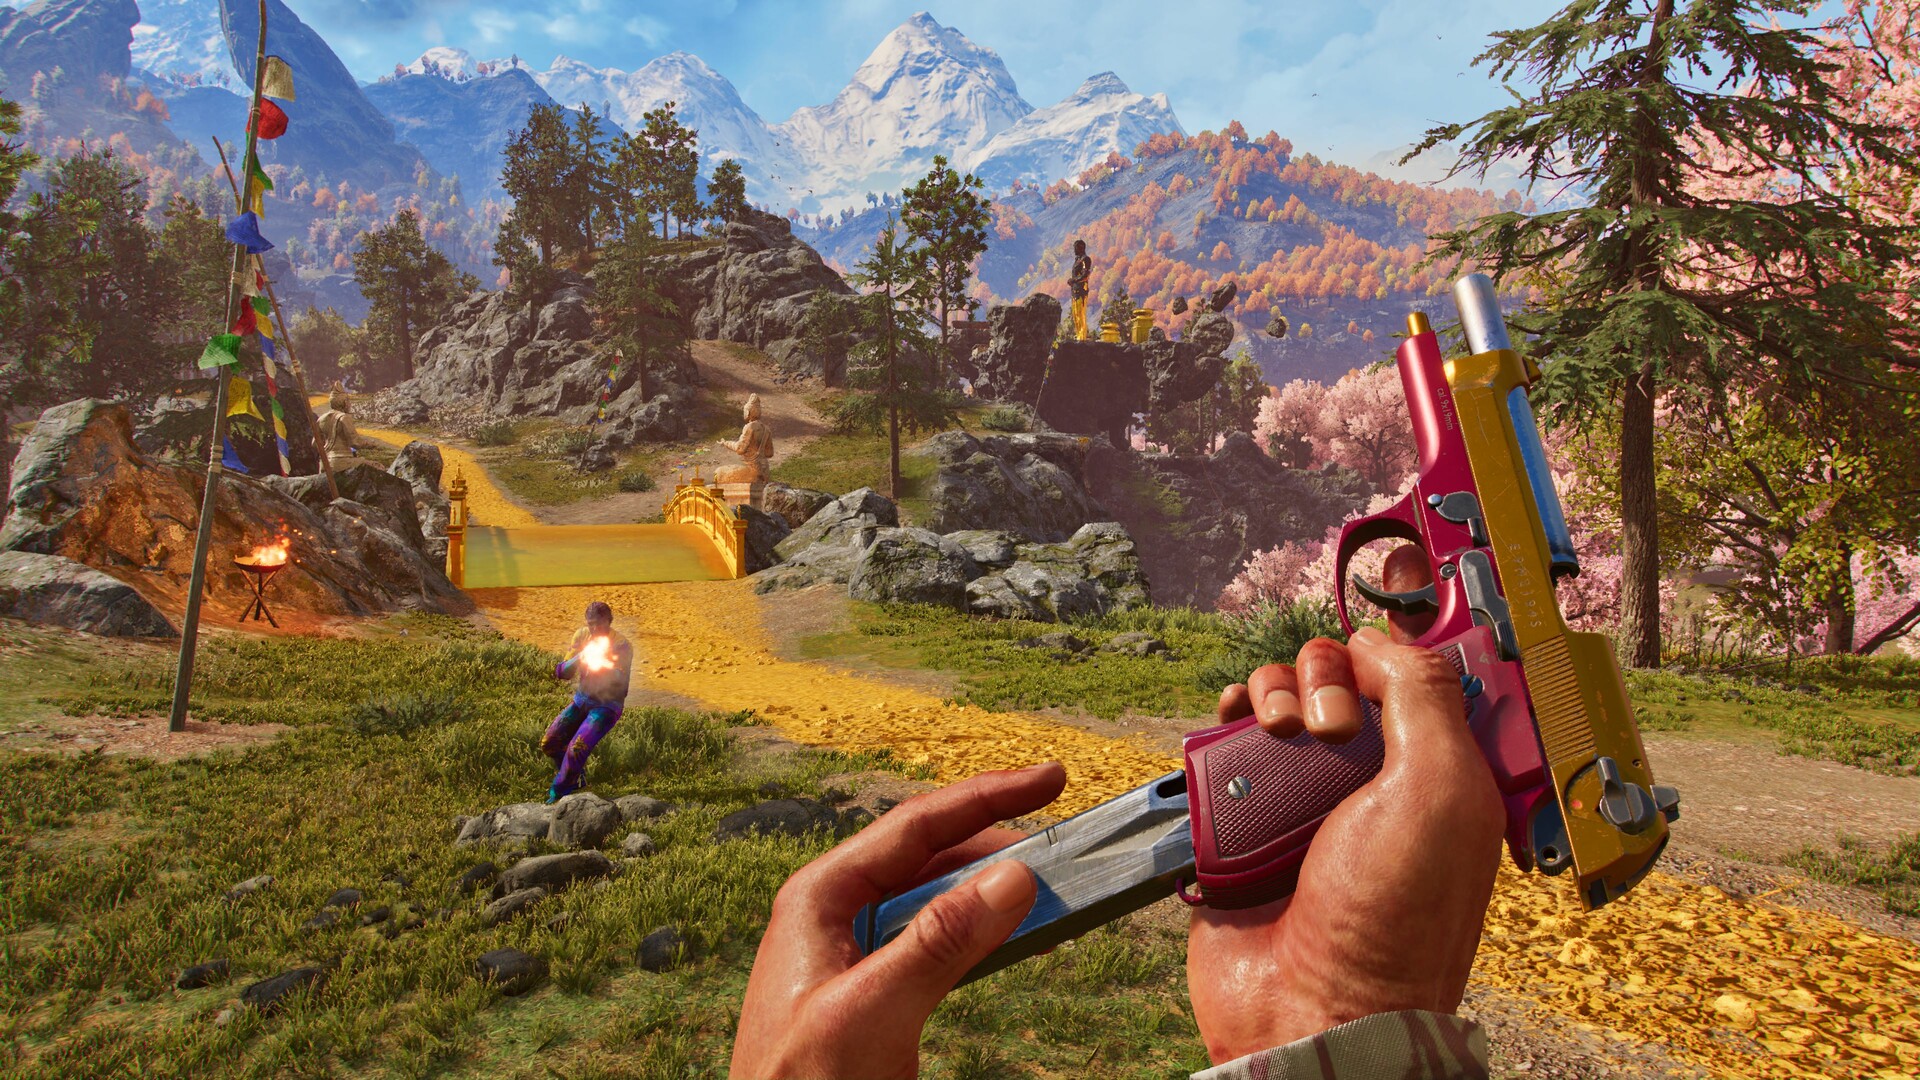 Far Cry 6 is coming to Game Pass on December 14